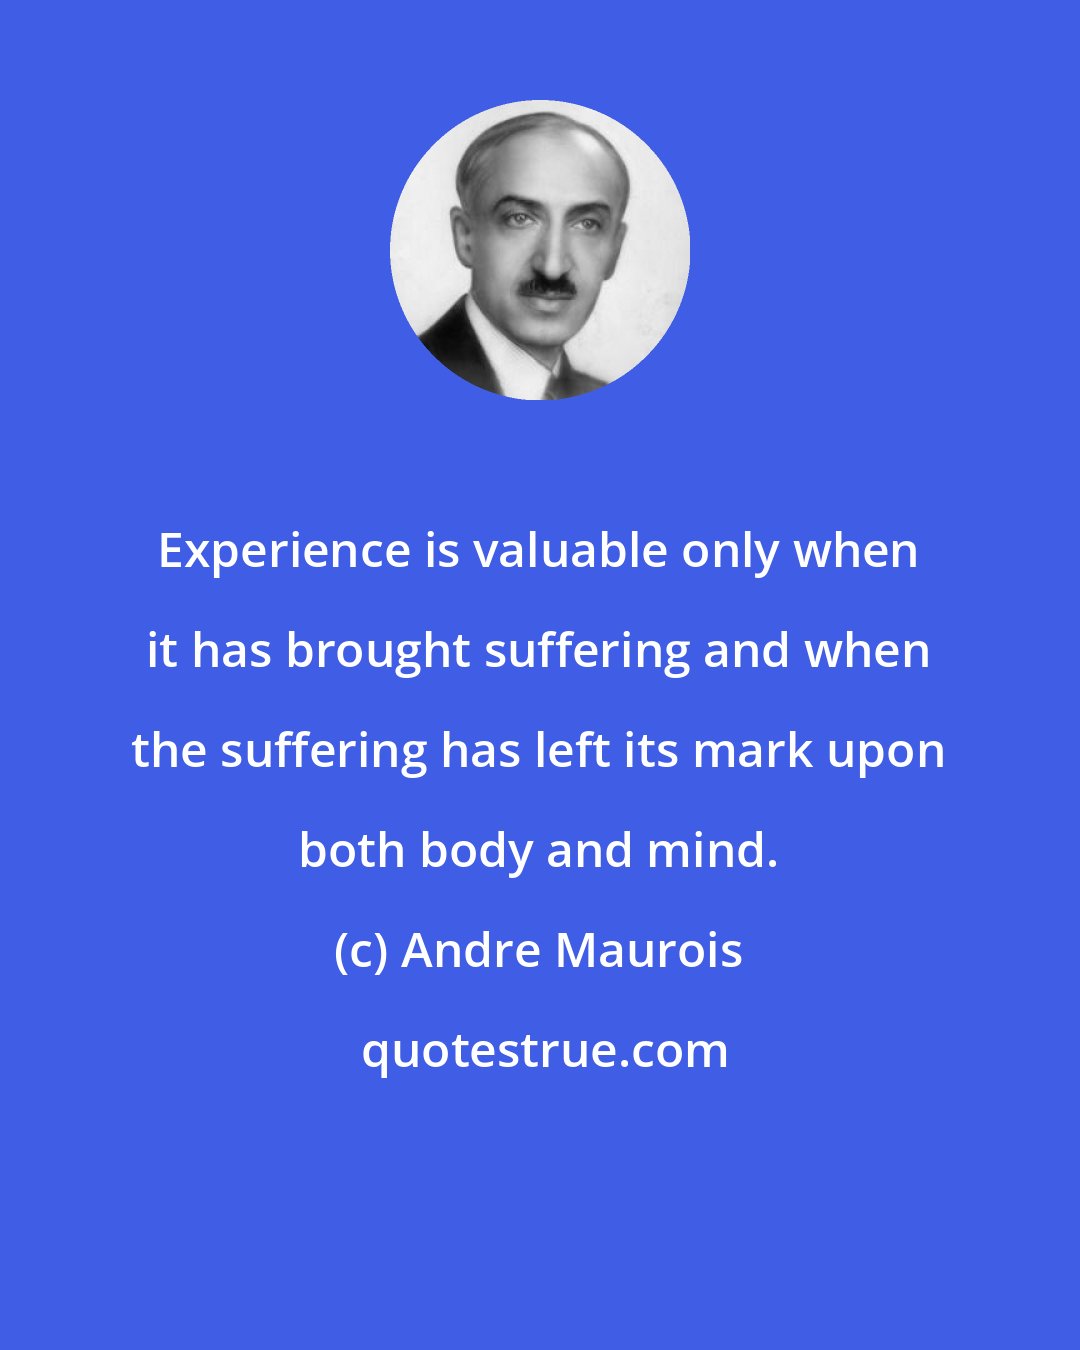 Andre Maurois: Experience is valuable only when it has brought suffering and when the suffering has left its mark upon both body and mind.